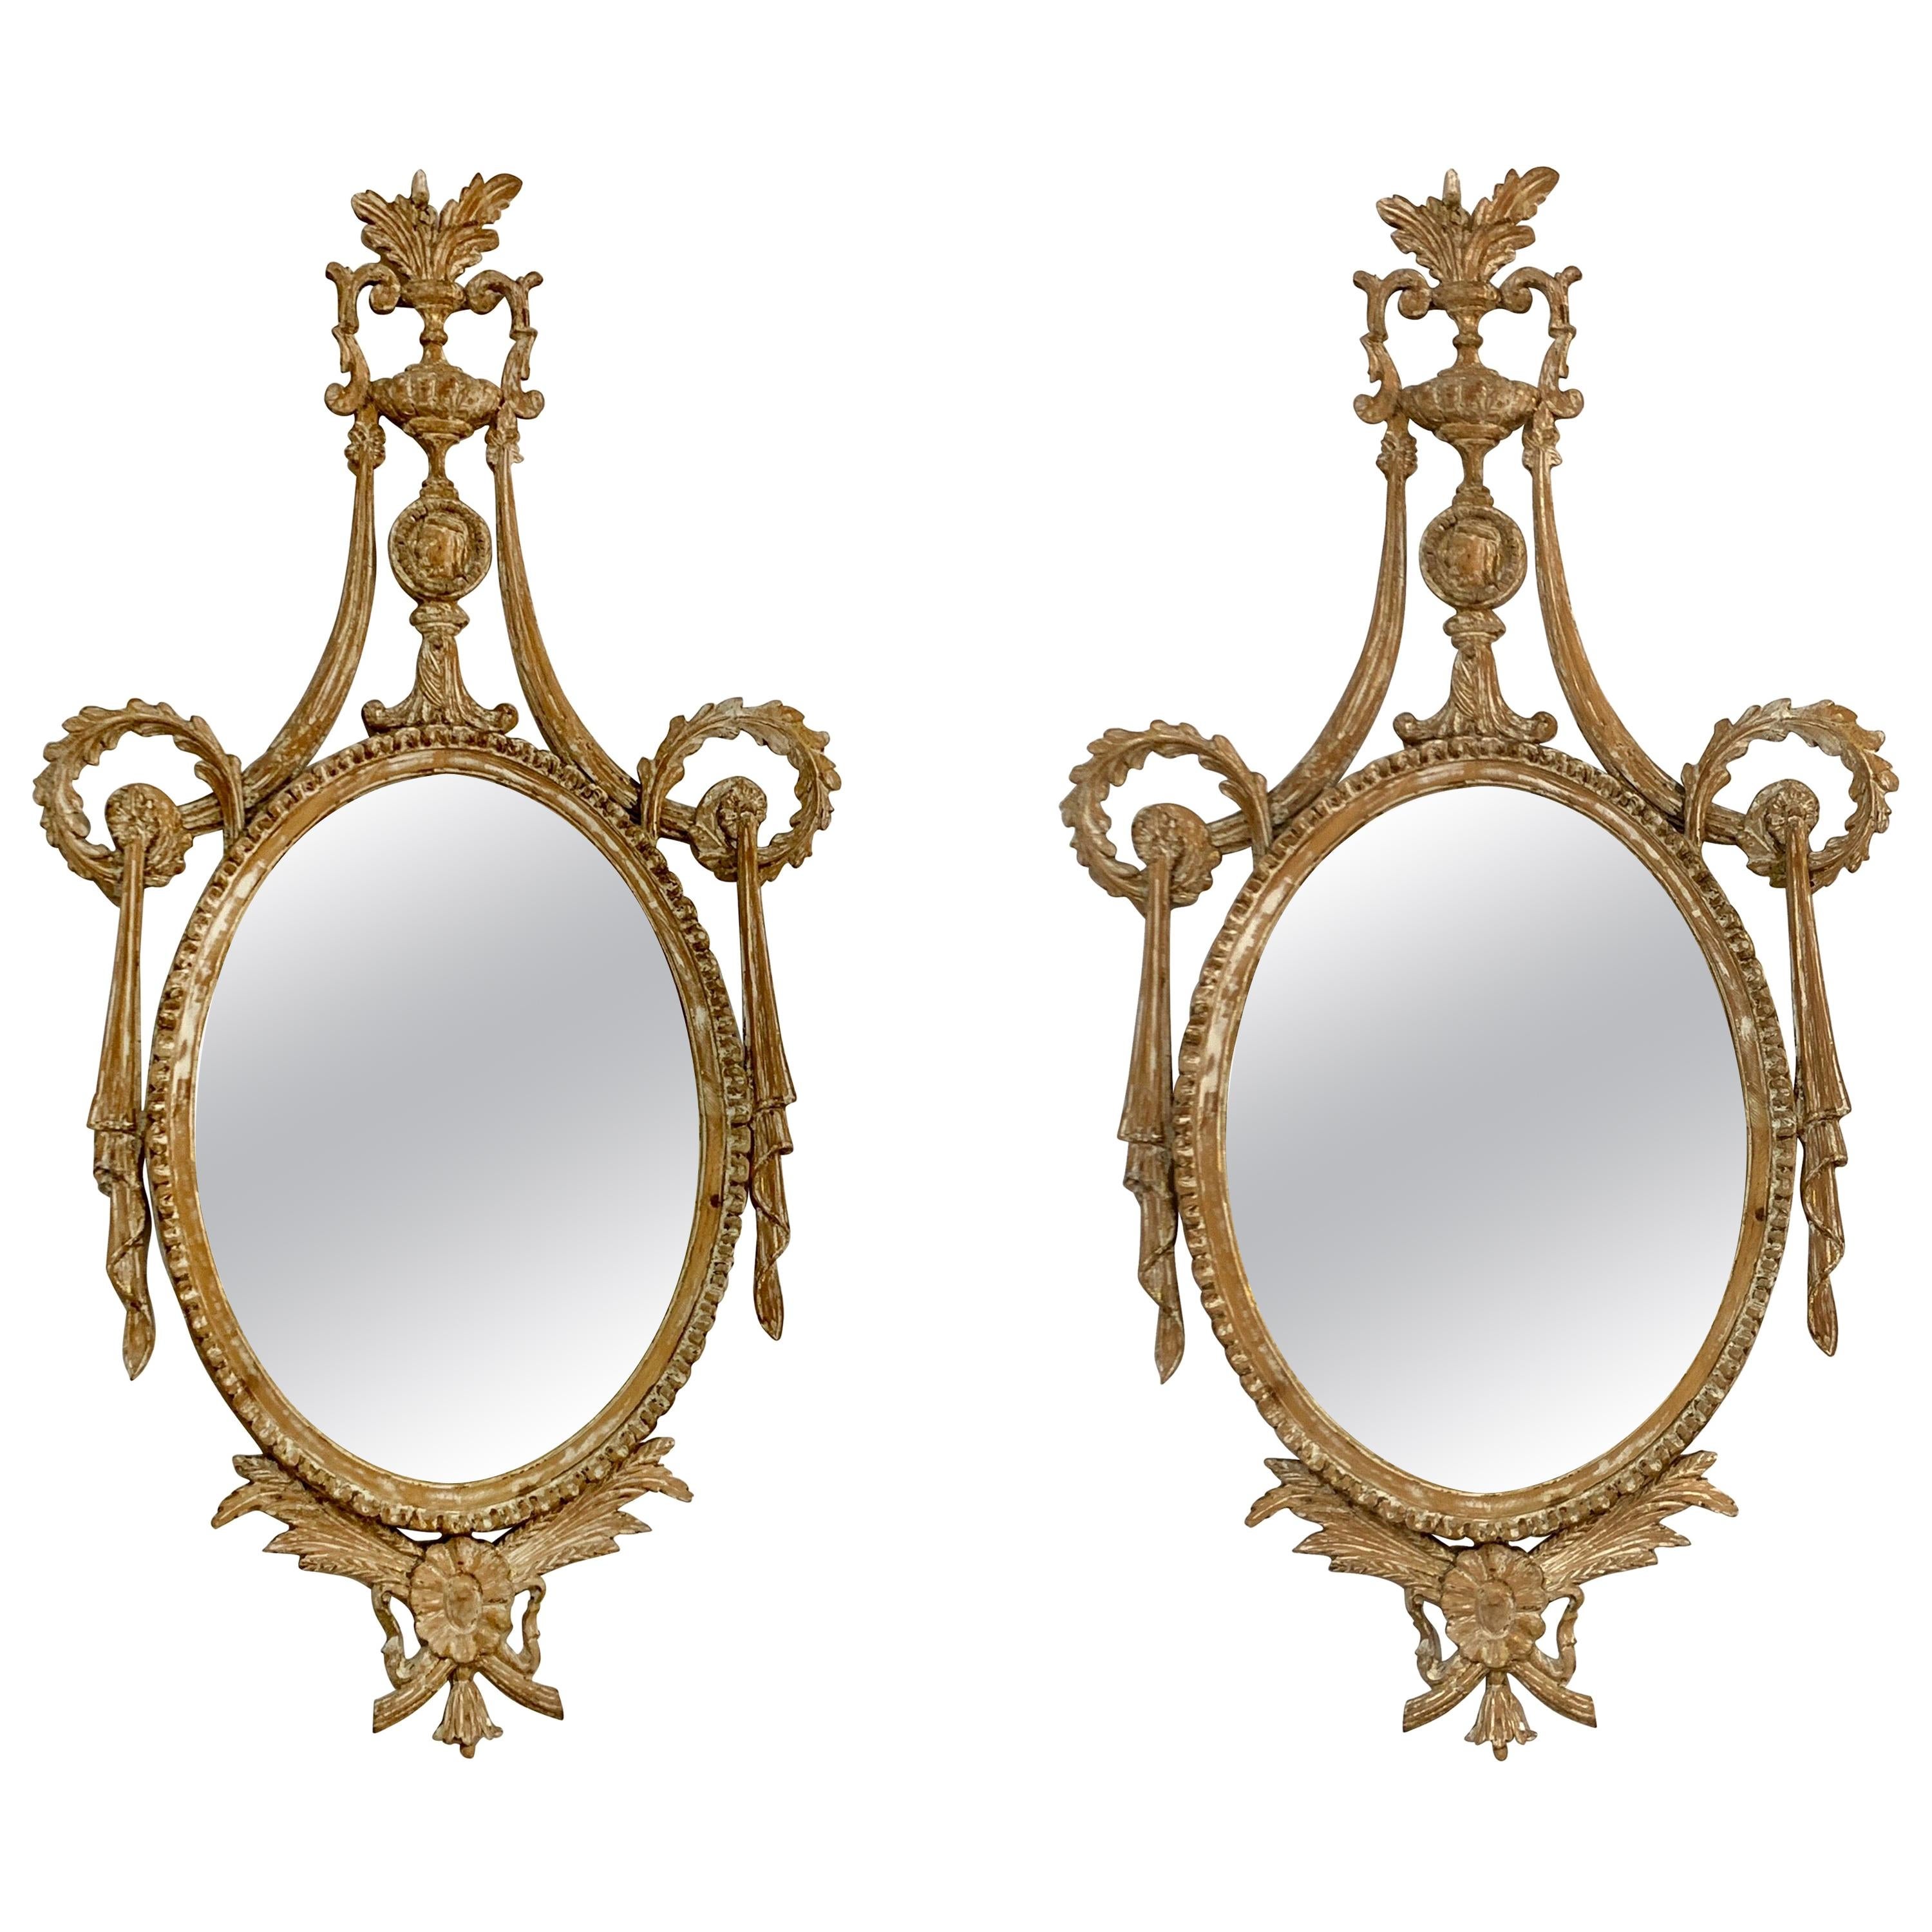 Pair of 19th Century Italian Neoclassical Carved and White Washed Mirrors